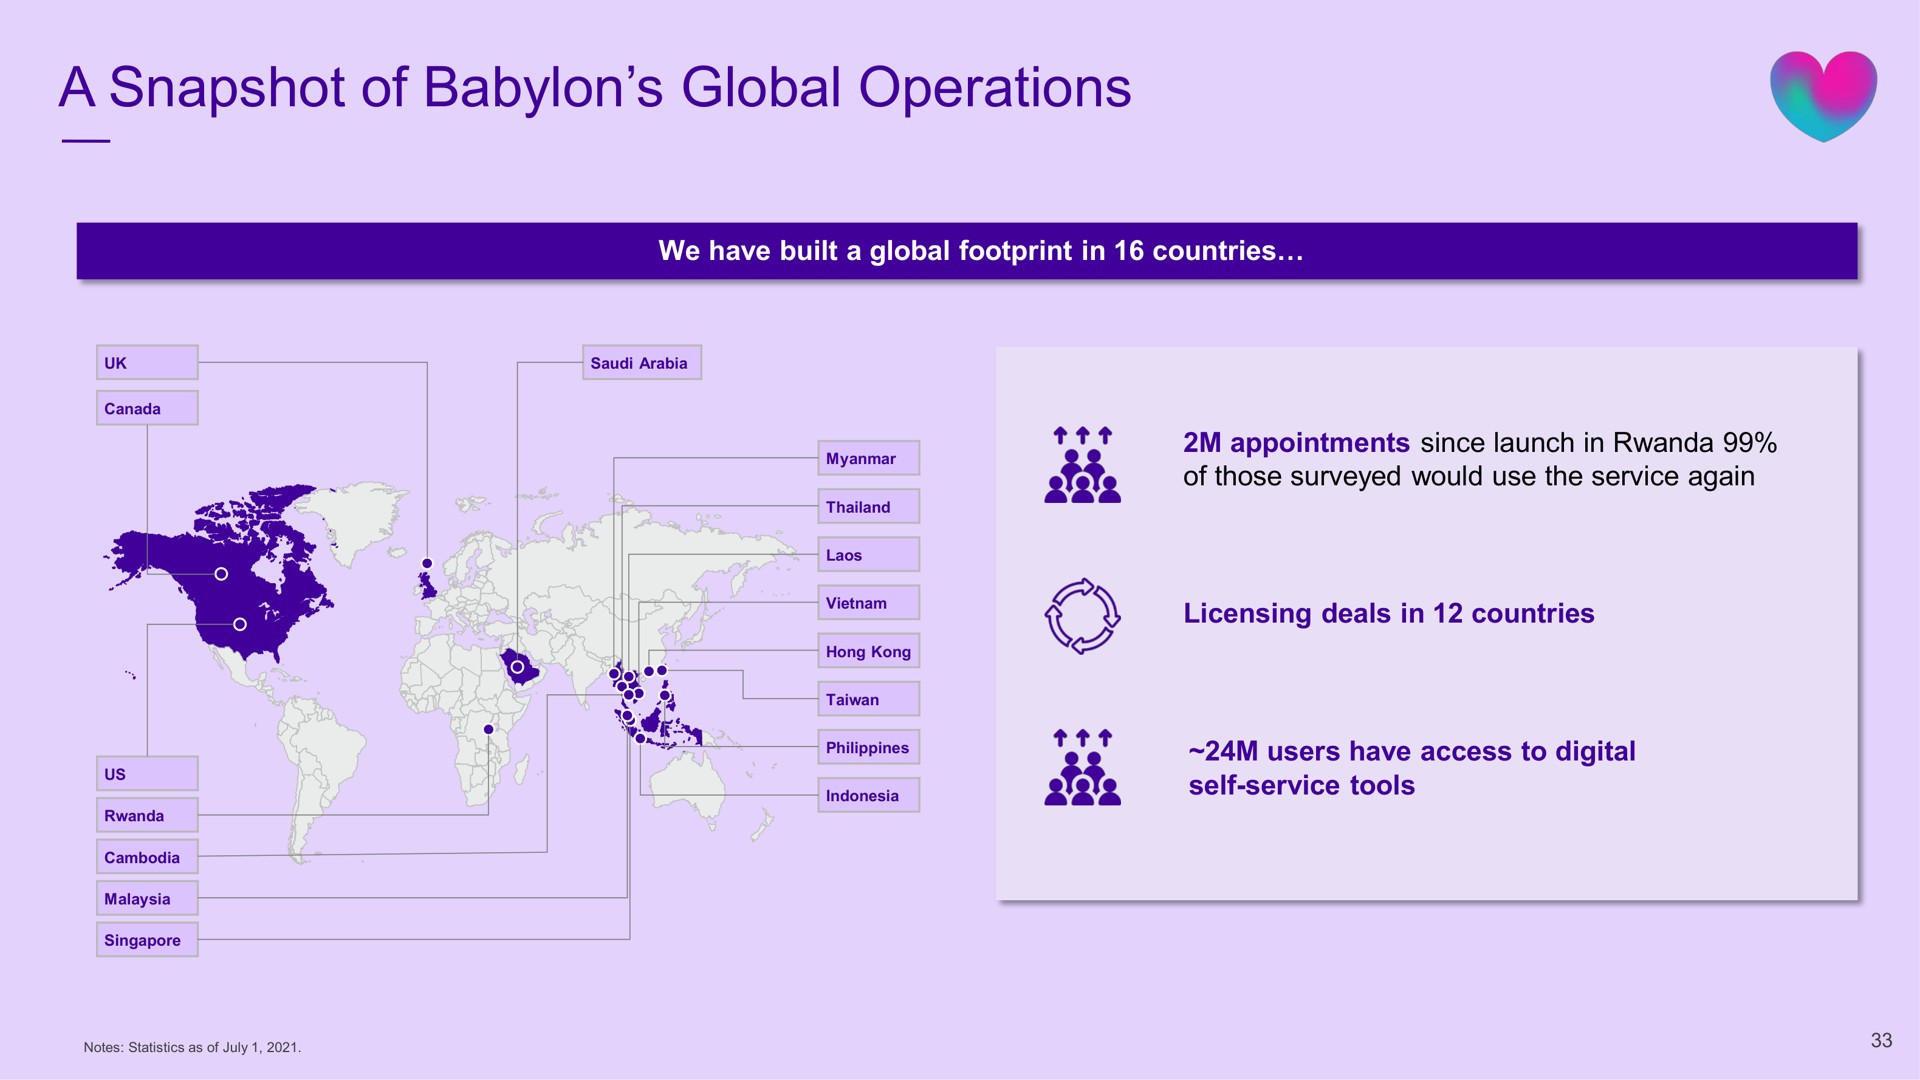 a snapshot of global operations | Babylon